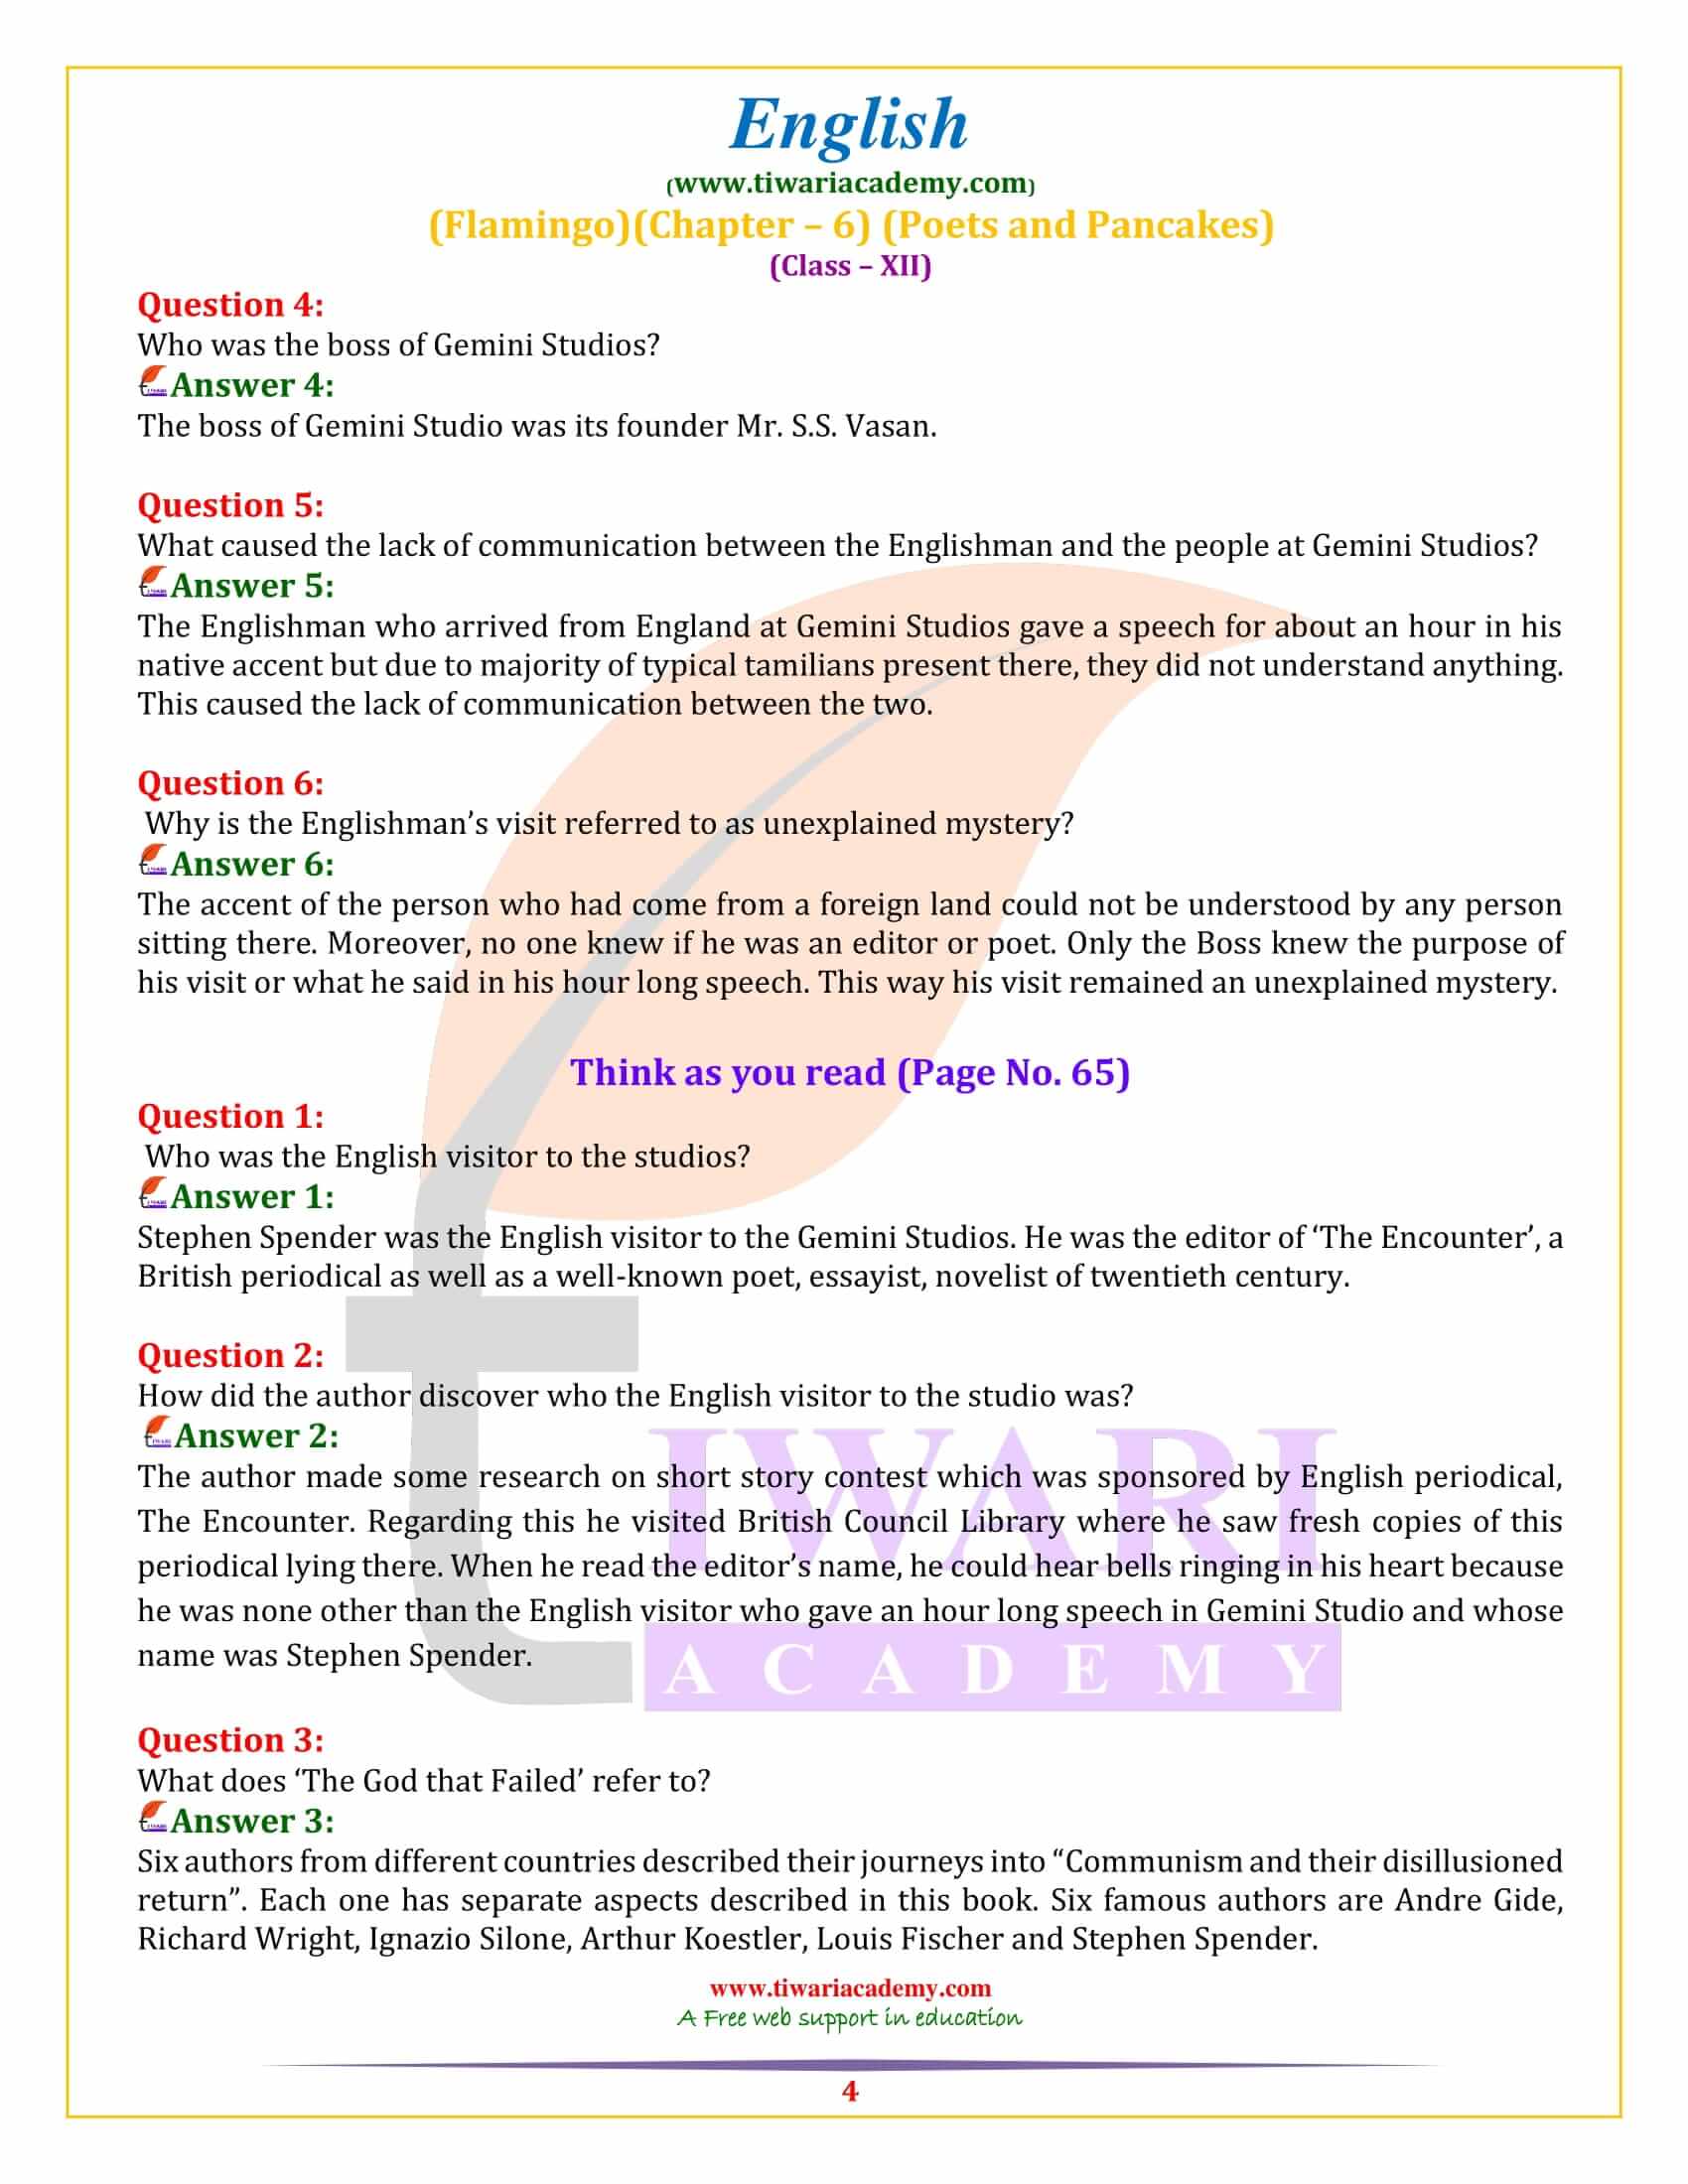 NCERT Solutions for Class 12 English Flamingo Chapter 6